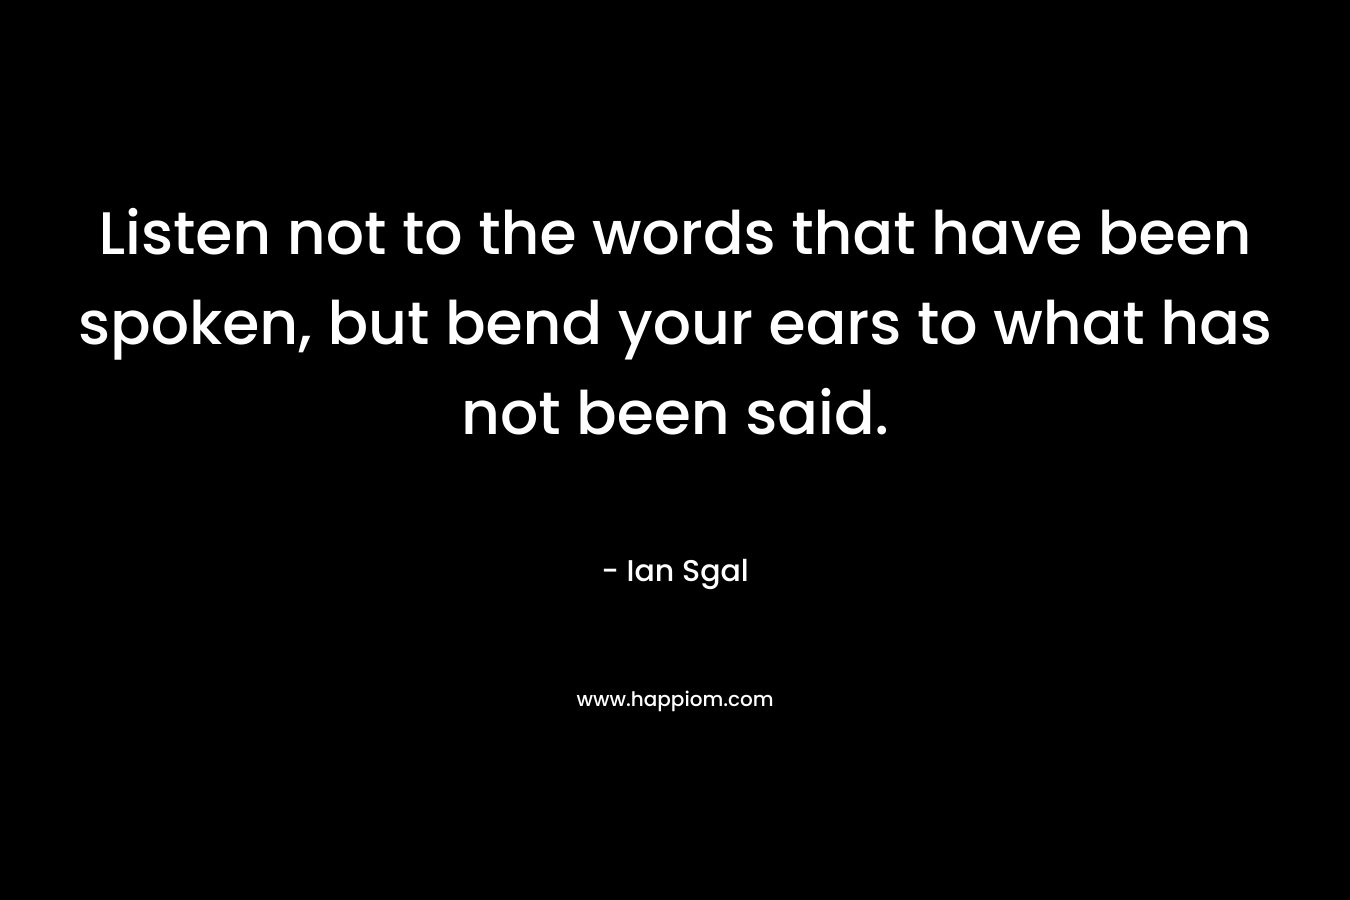 Listen not to the words that have been spoken, but bend your ears to what has not been said.